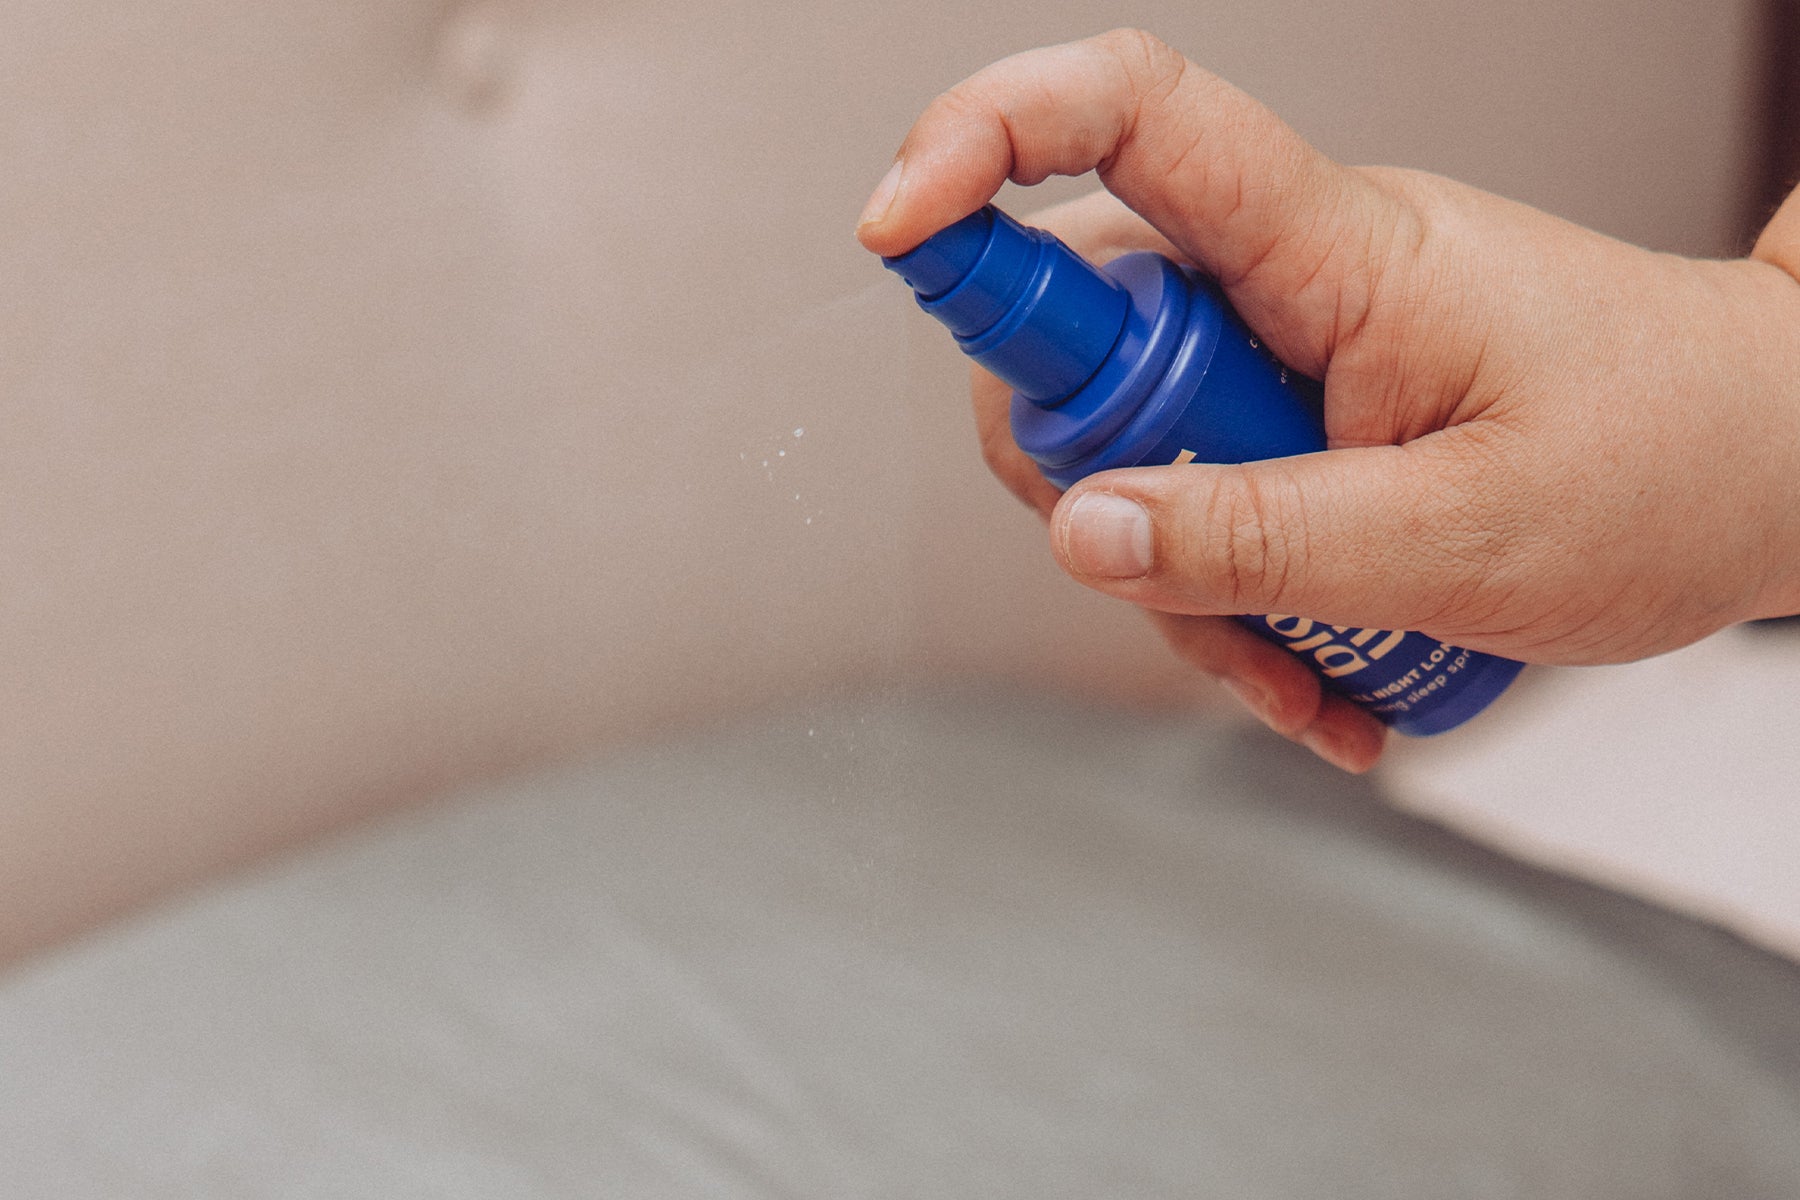 Person holding a bottle of pillow spray and spraying over the pillow